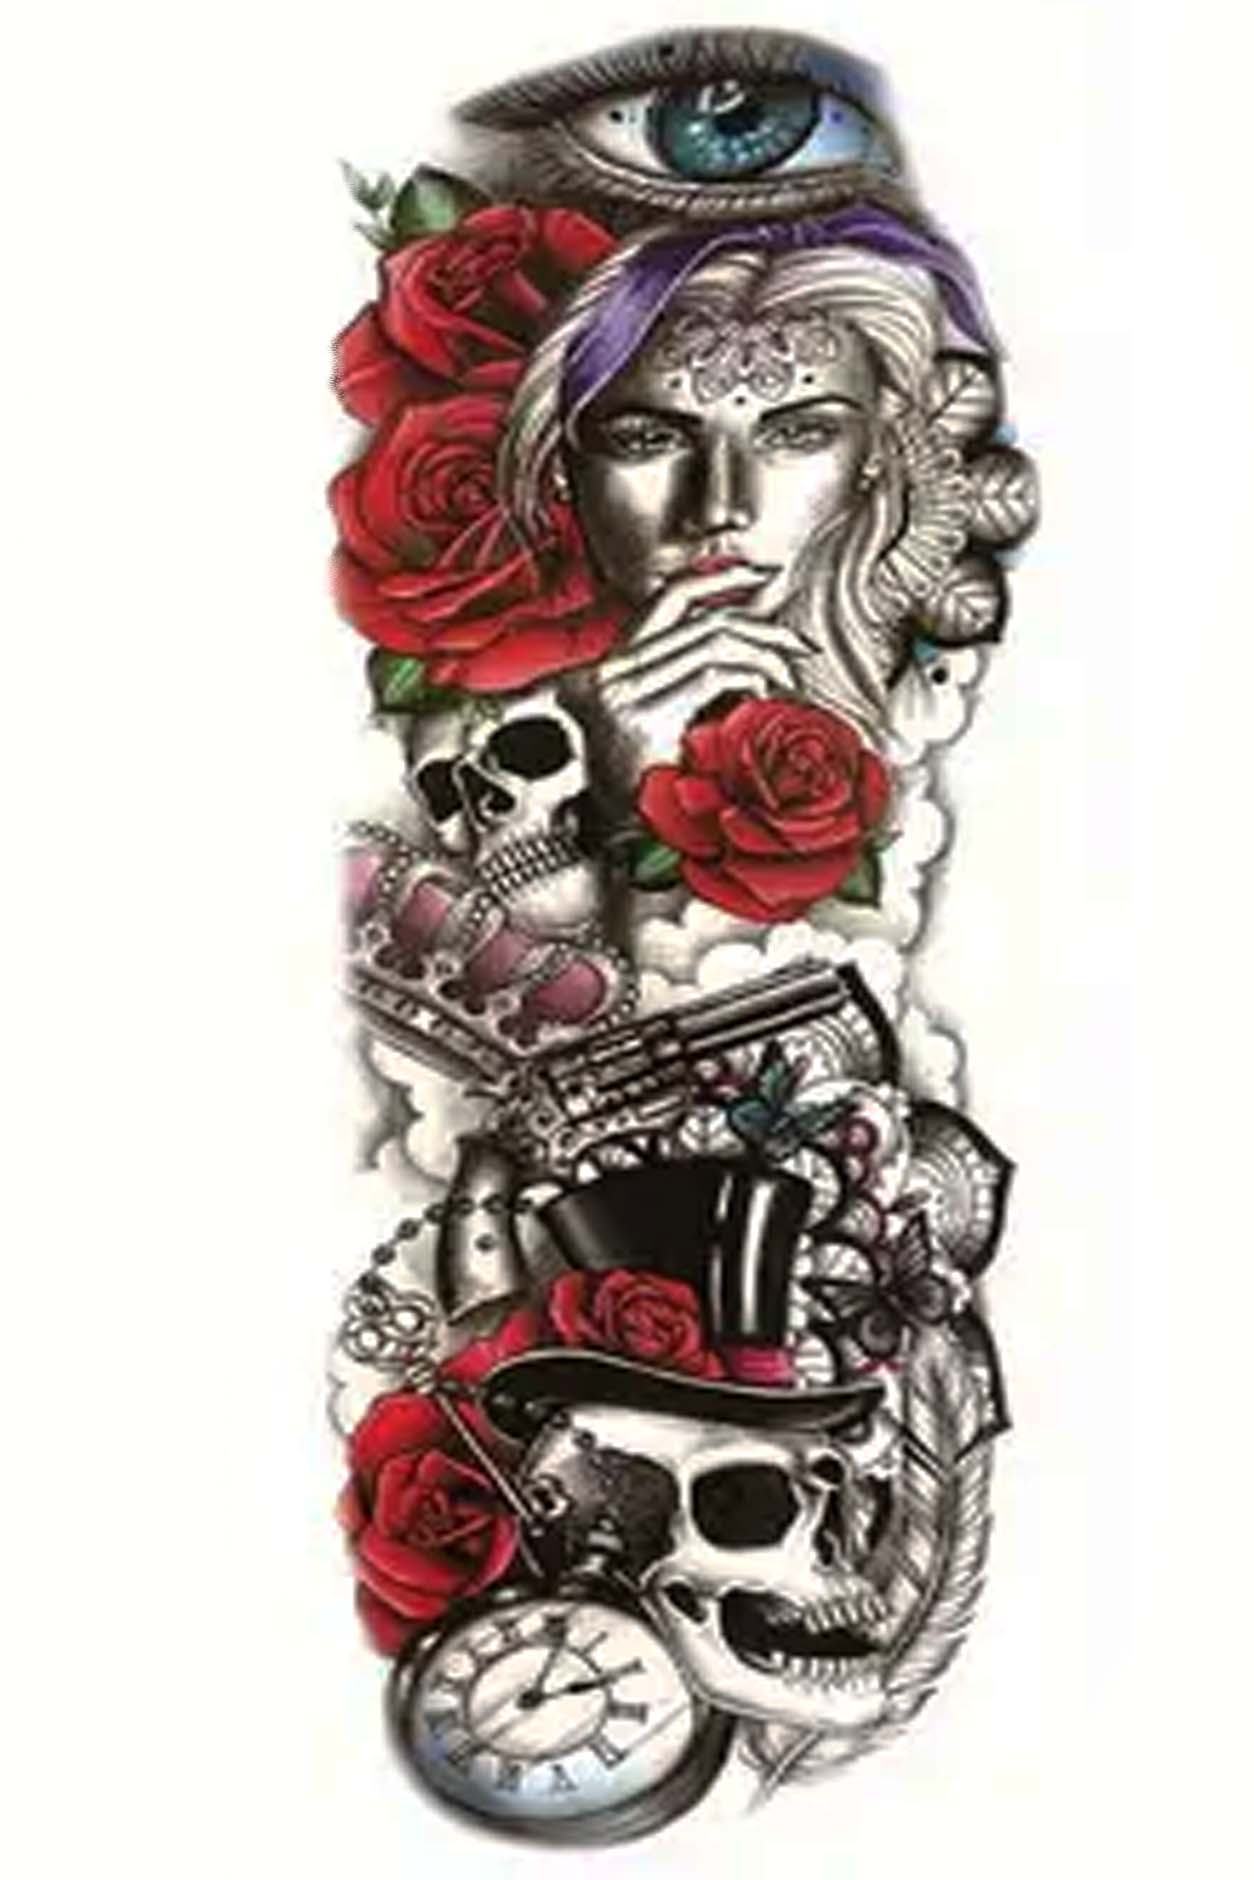 This awesome tat is telling a story of love, life, and death. The premise reminds you of The Great Gatsby. This tat tells its story starting with a watching eye, a beautiful woman, full red roses, crowns, guns, skulls, top hats, and time. Then the design is brought together with lace, feathers, butterflies, and clouds in black, red, and purple colors.